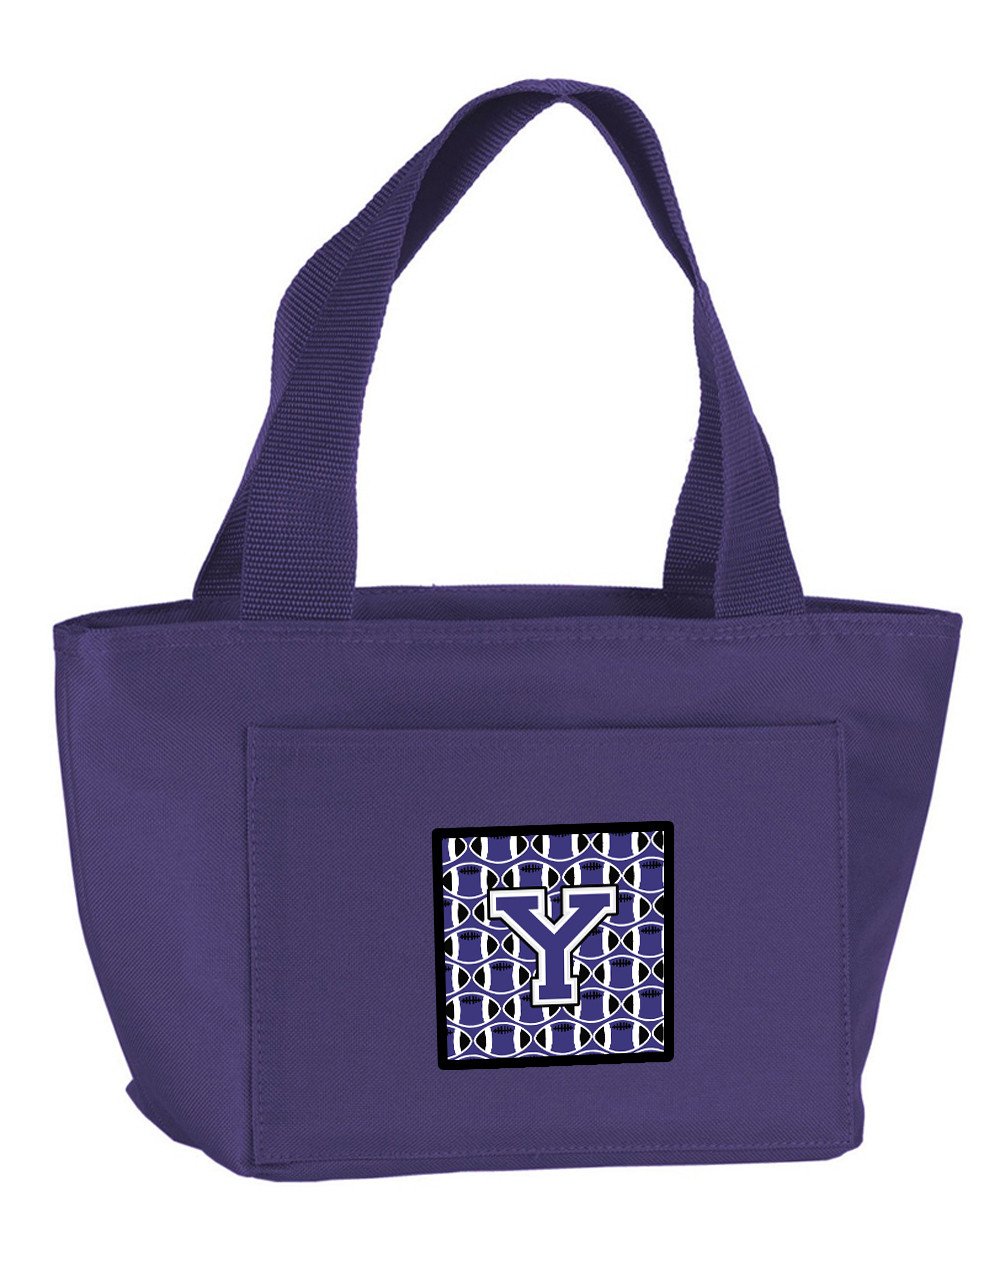 Letter Y Football Purple and White Lunch Bag CJ1068-YPR-8808 by Caroline's Treasures